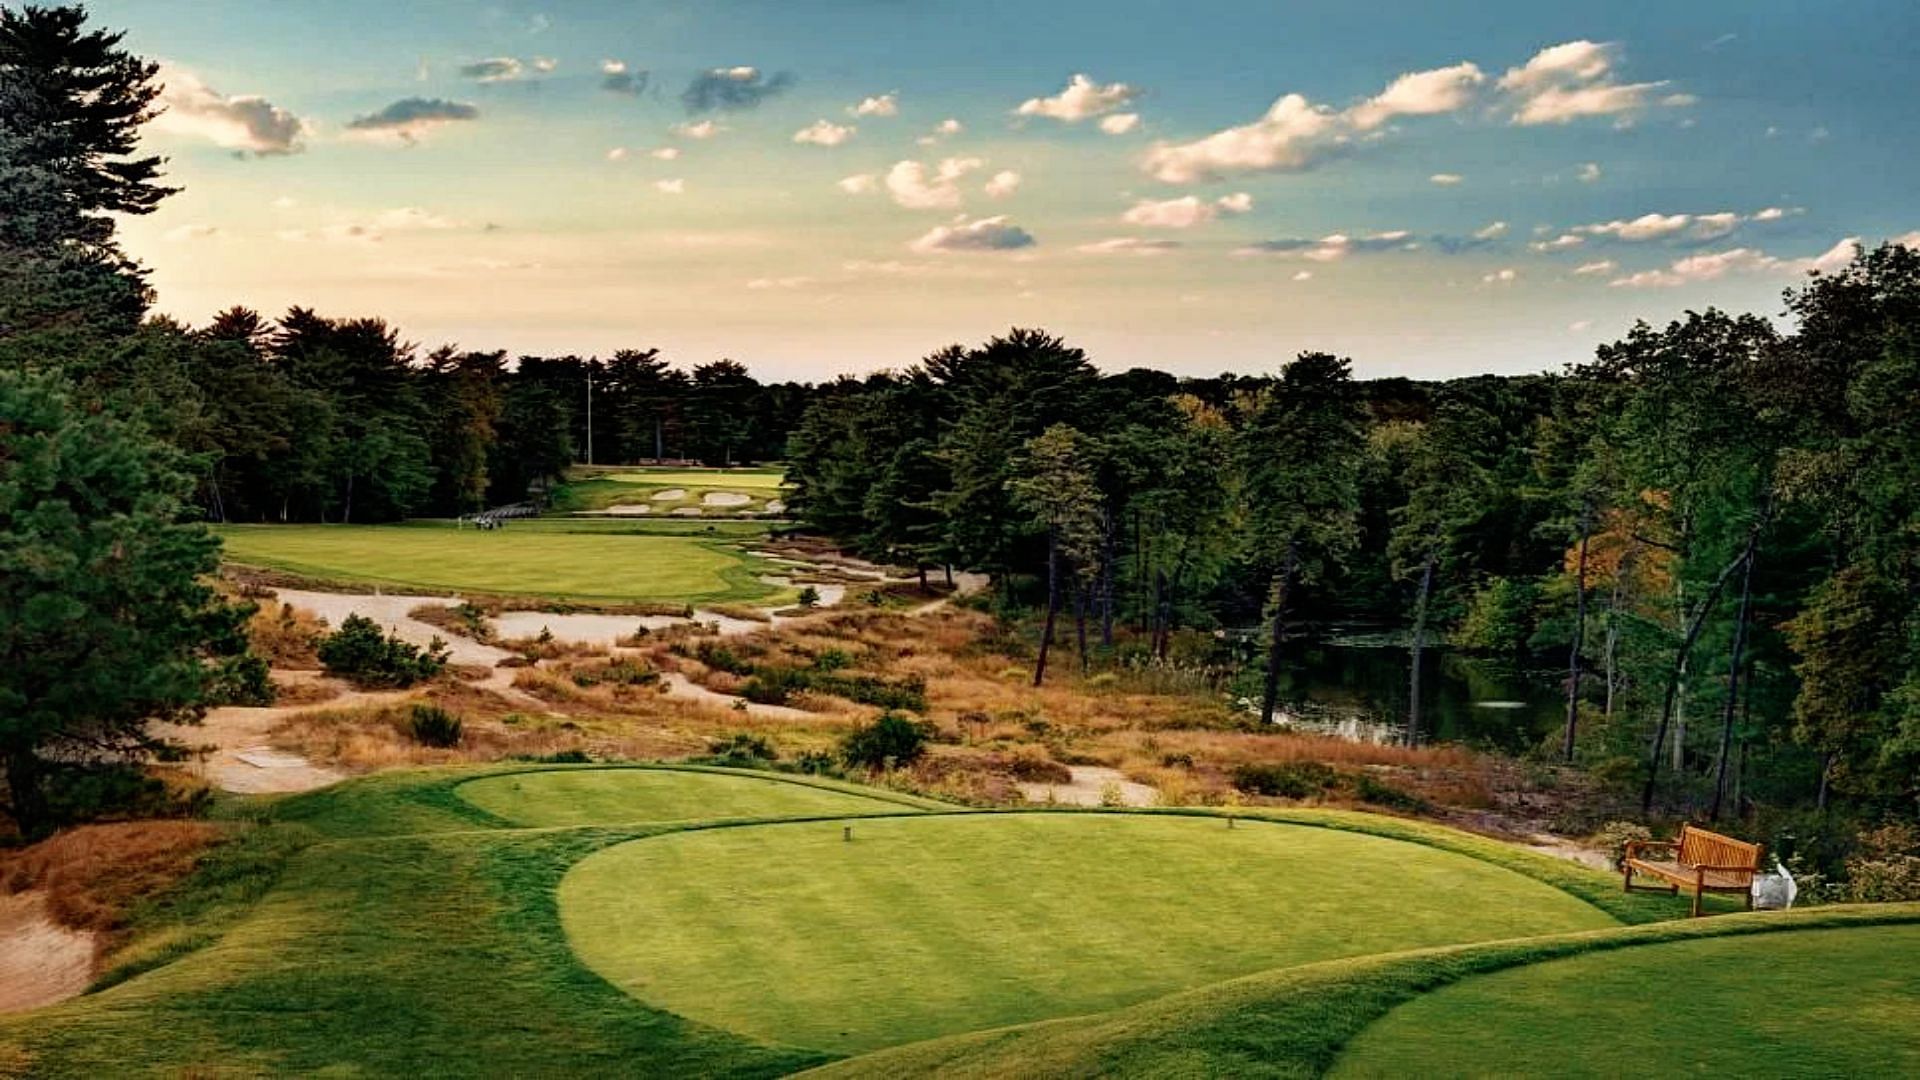 Number one in the Top 100 Golf Courses in the U.S.: Pine Valley Golf Club (Image via Golf Digest).